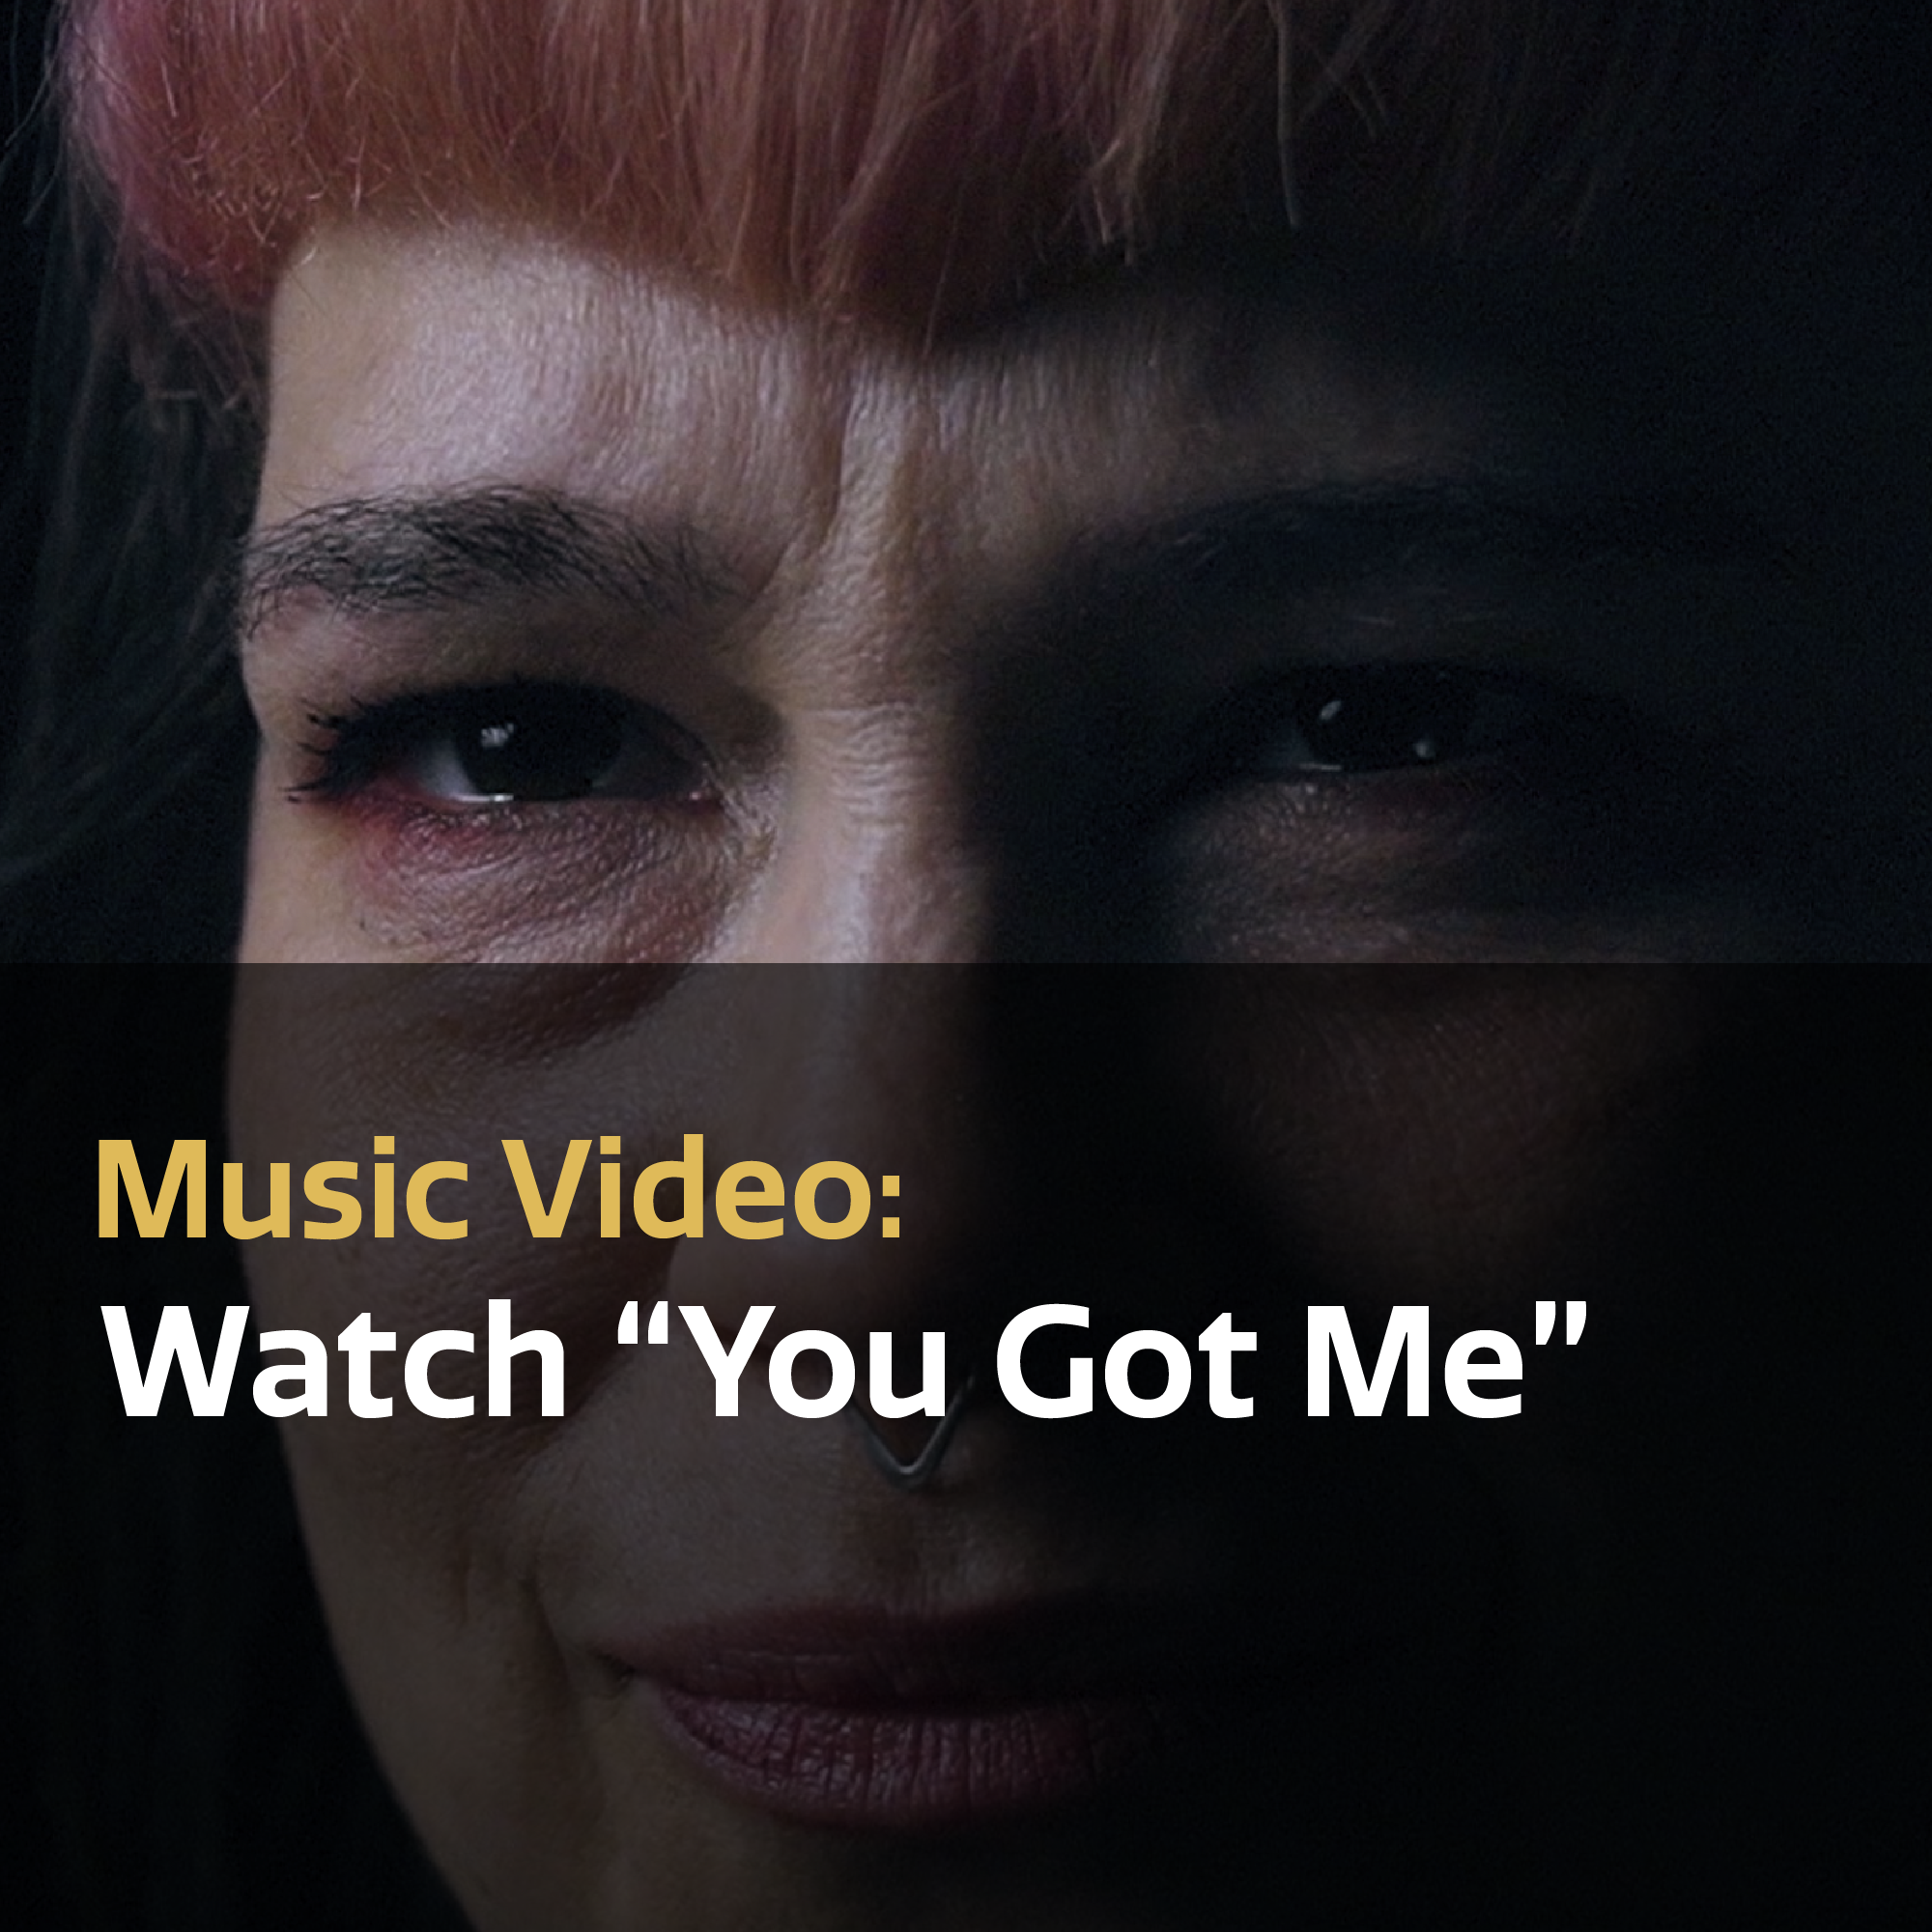 Watch the "You Got Me" Music Video